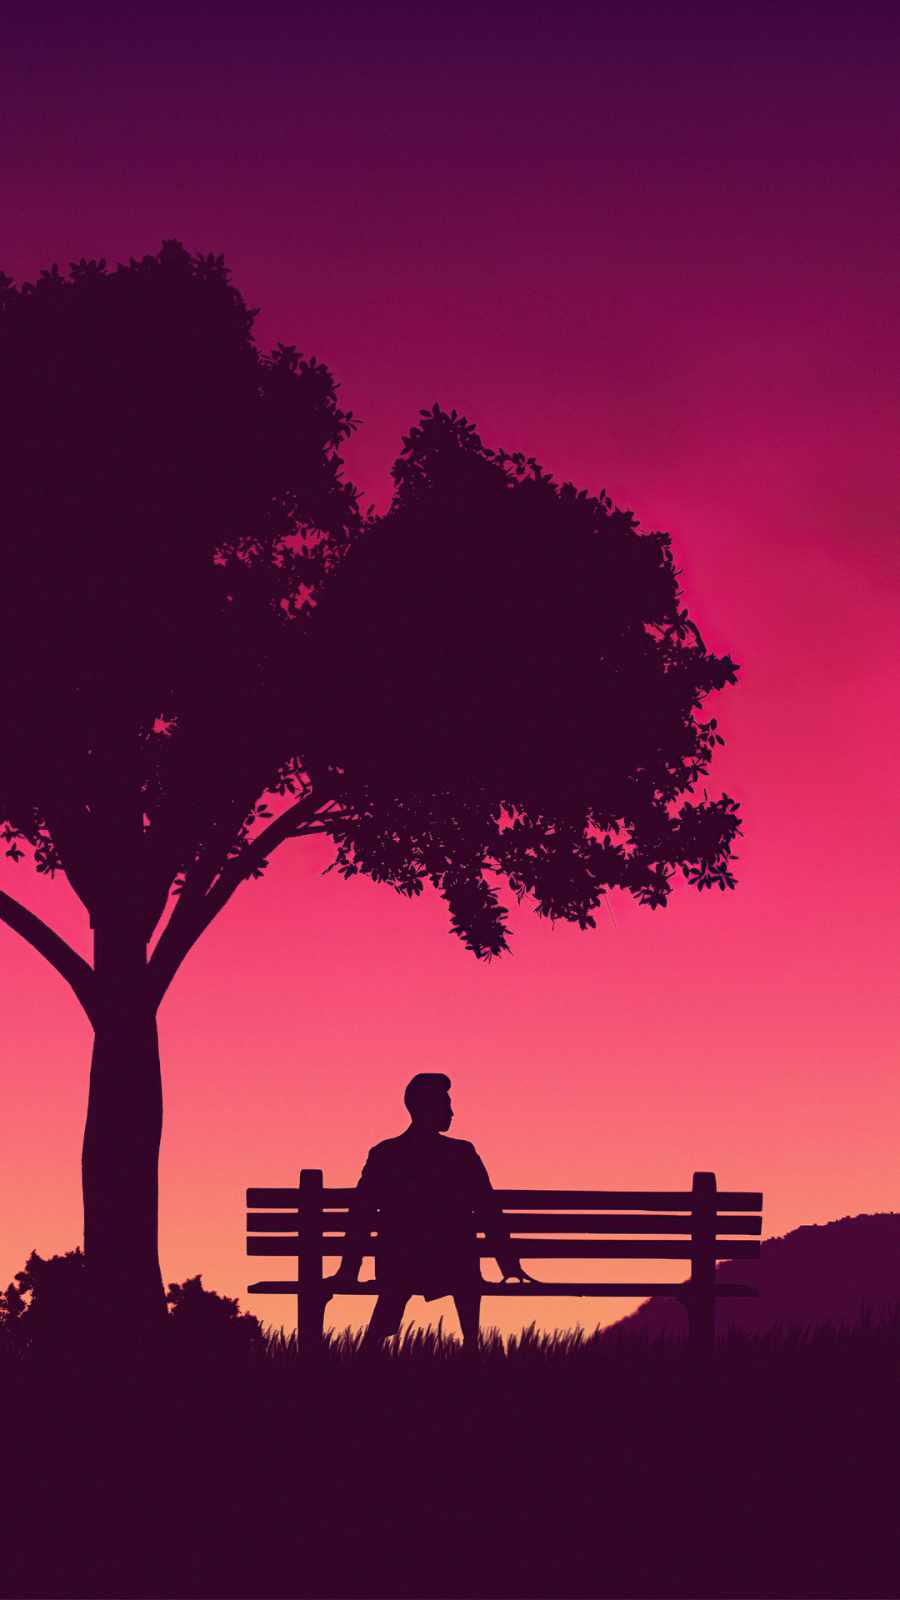 Alone Is Better IPhone Wallpaper - IPhone Wallpapers : iPhone Wallpapers